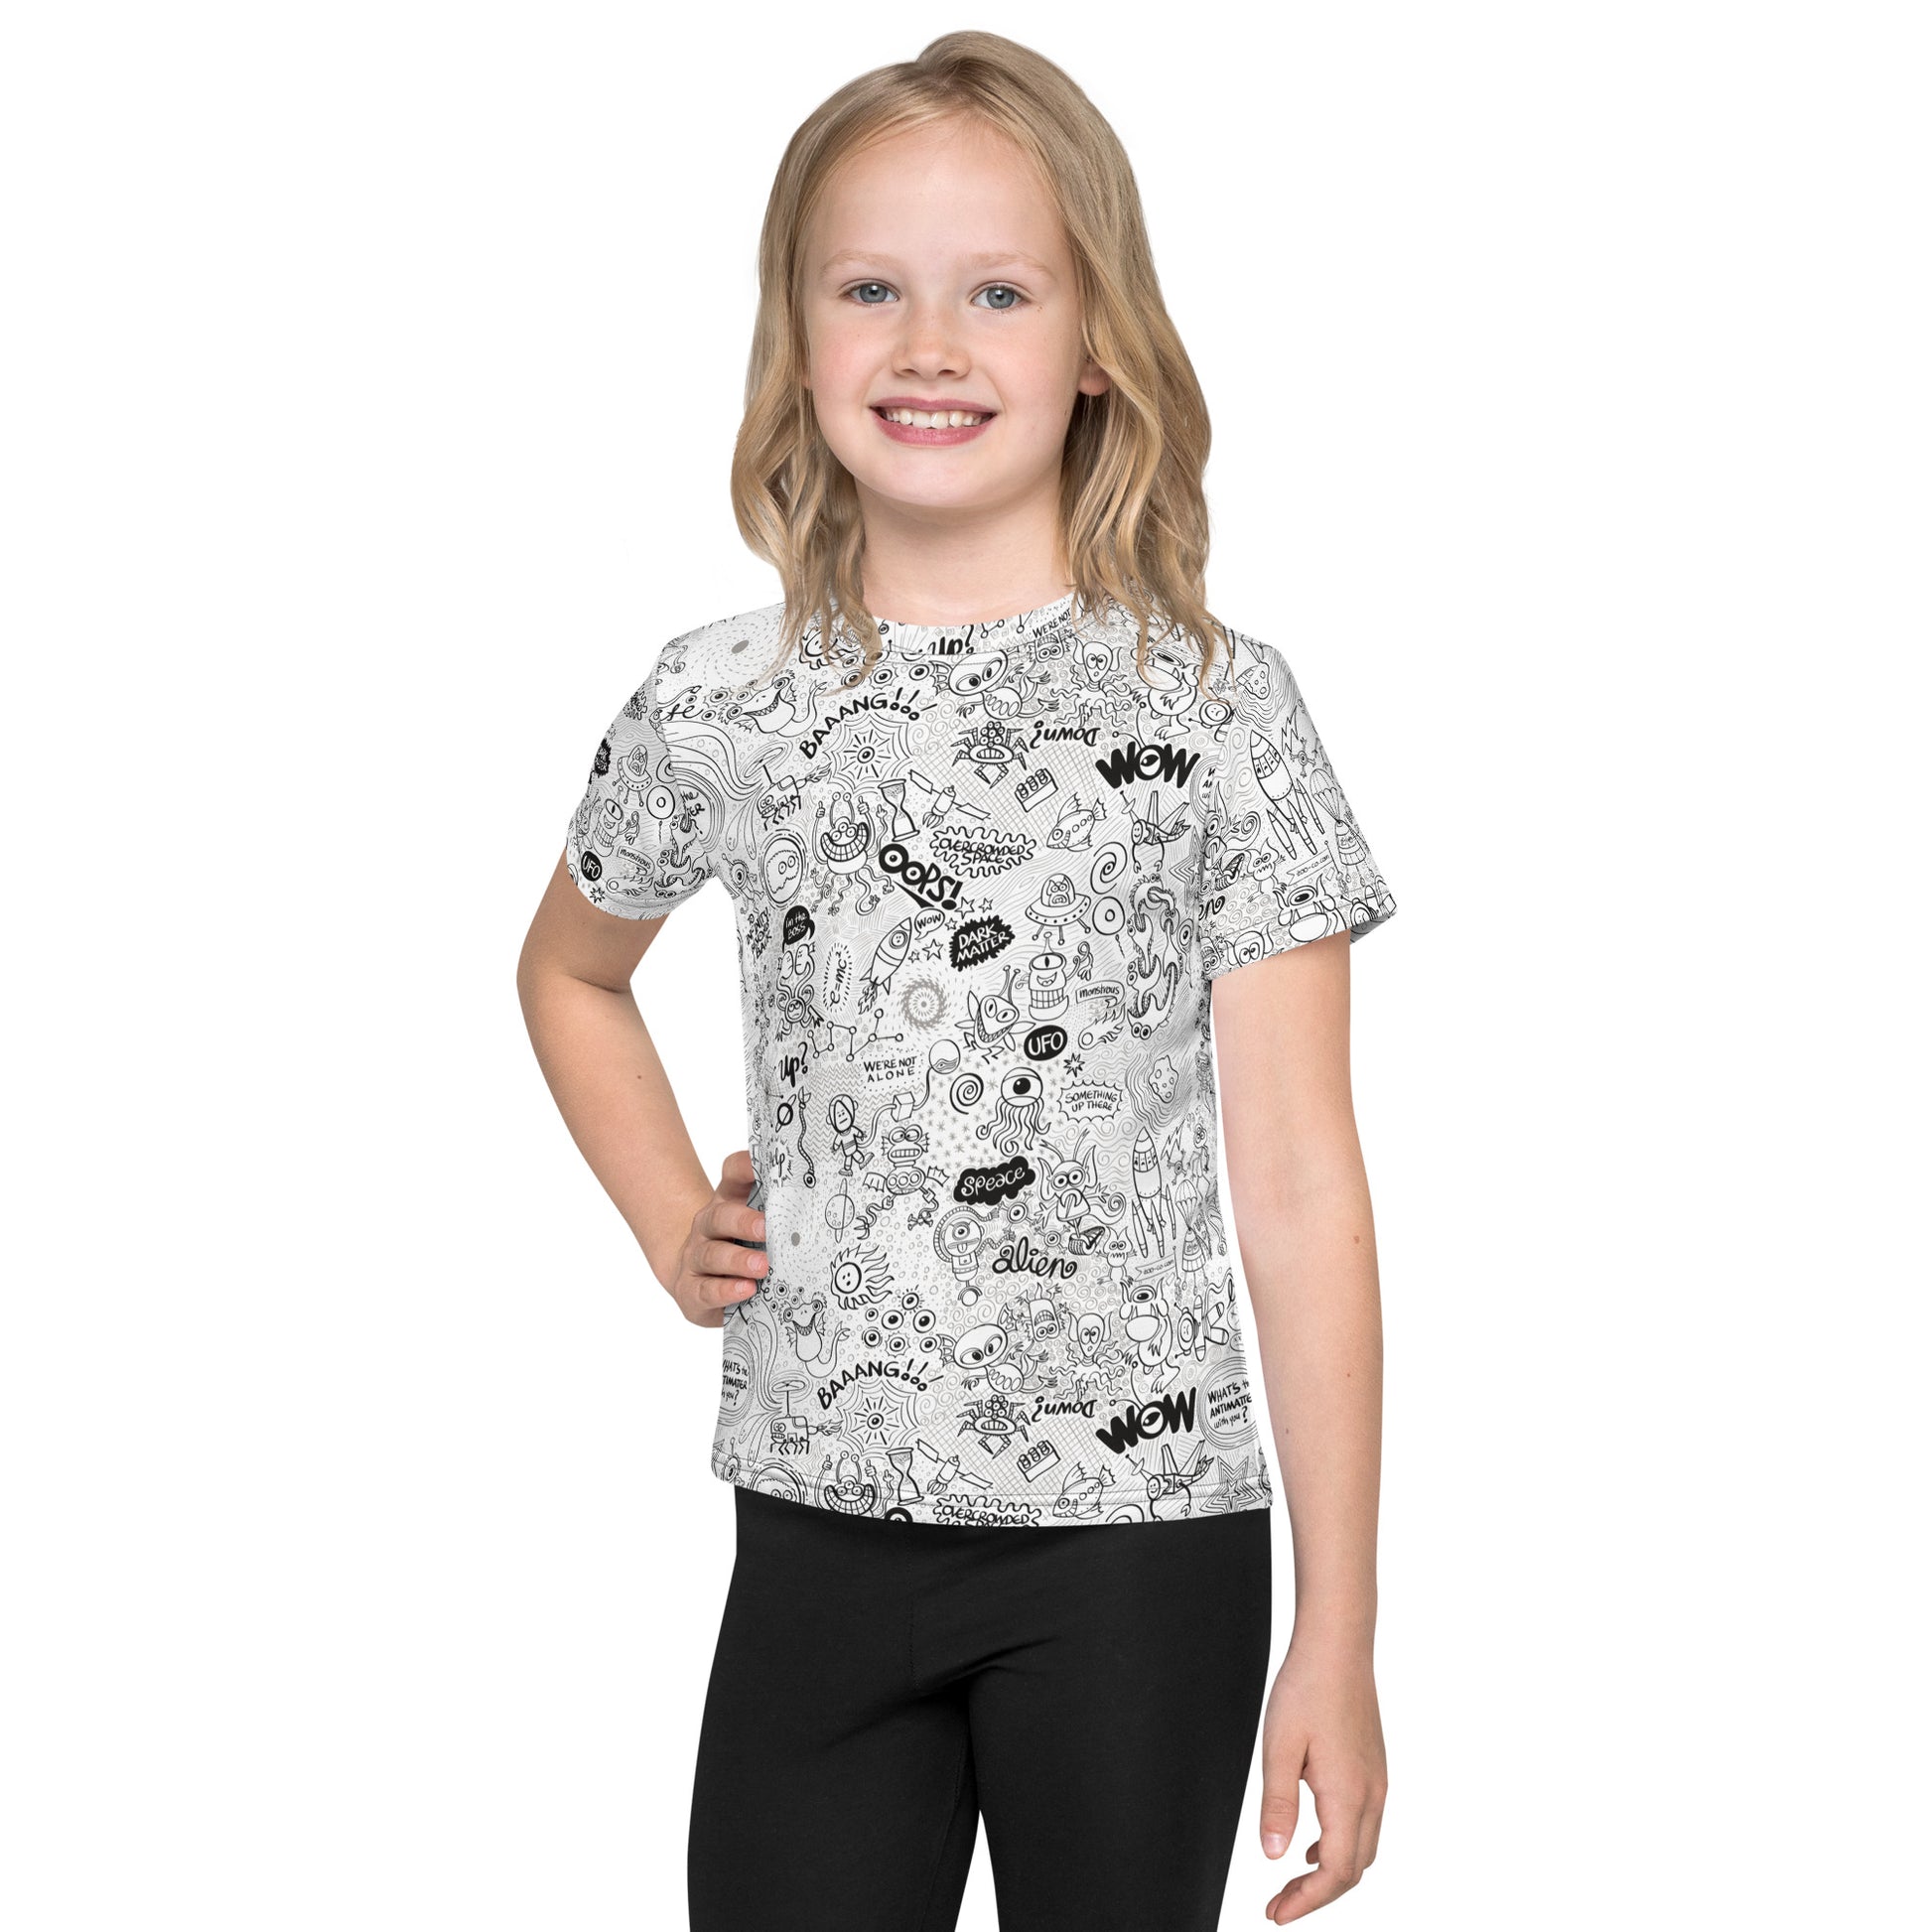 Celebrating the most comprehensive Doodle art of the universe Kids crew neck t-shirt. Lifestyle